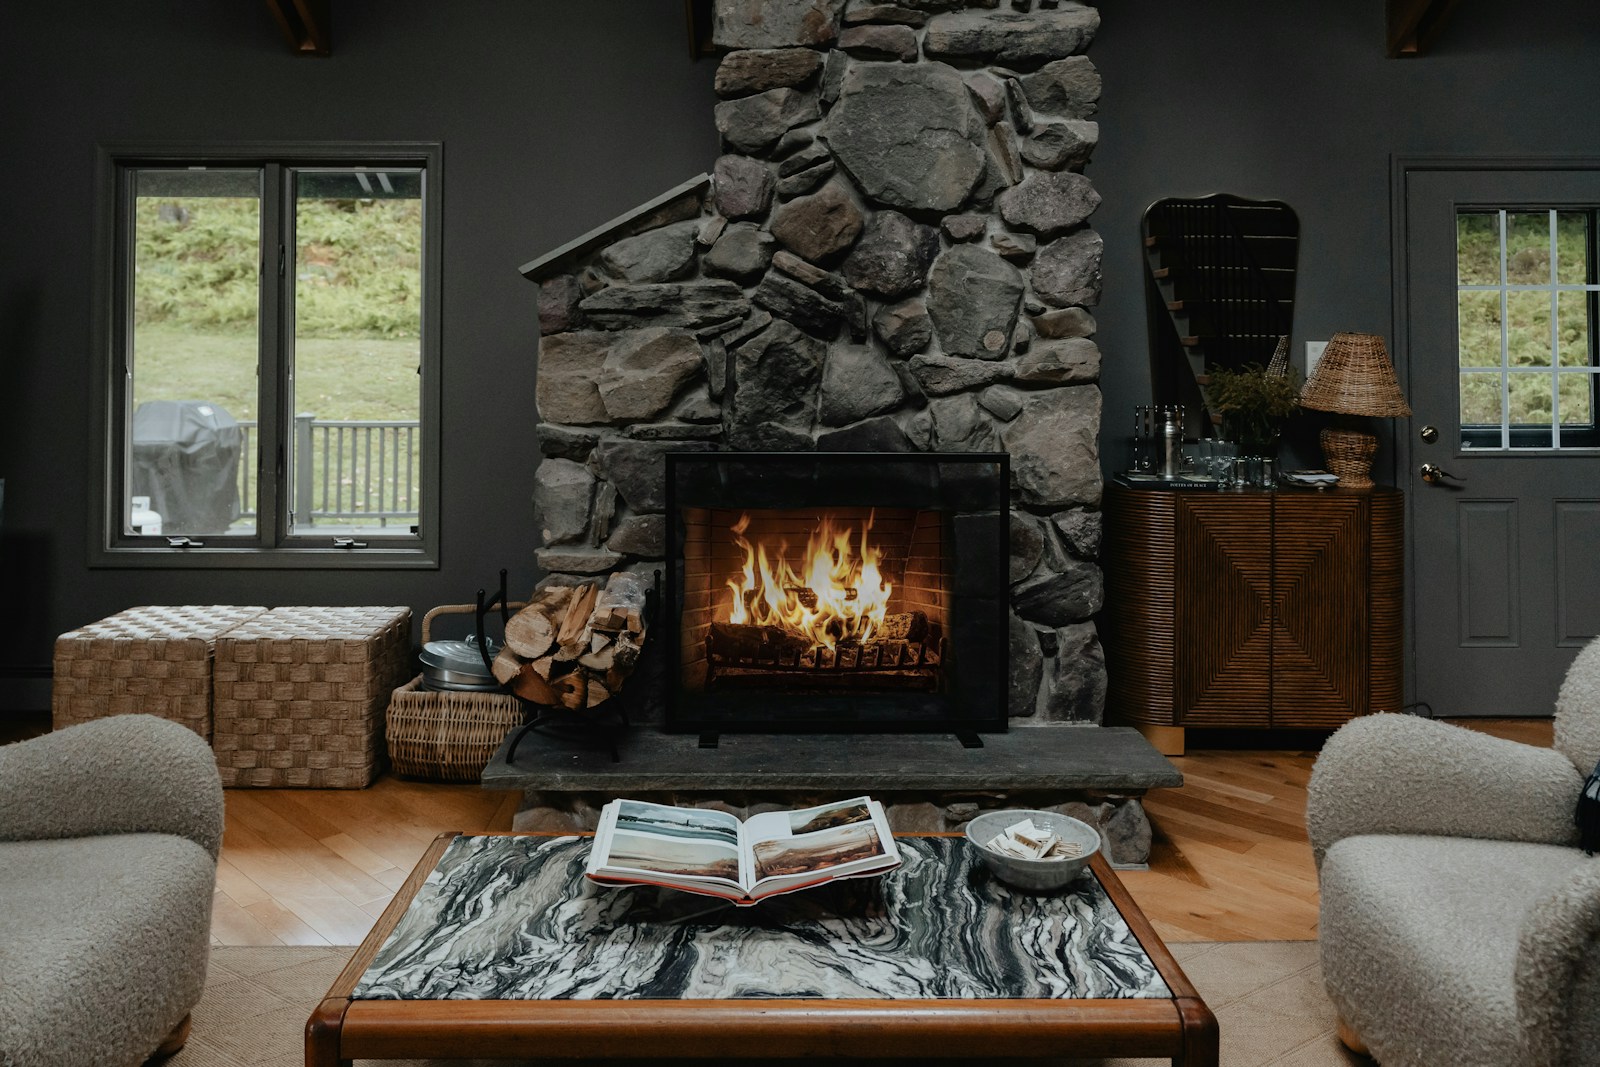 How to Deep Clean and Maintain Your Stone Fireplace Safely